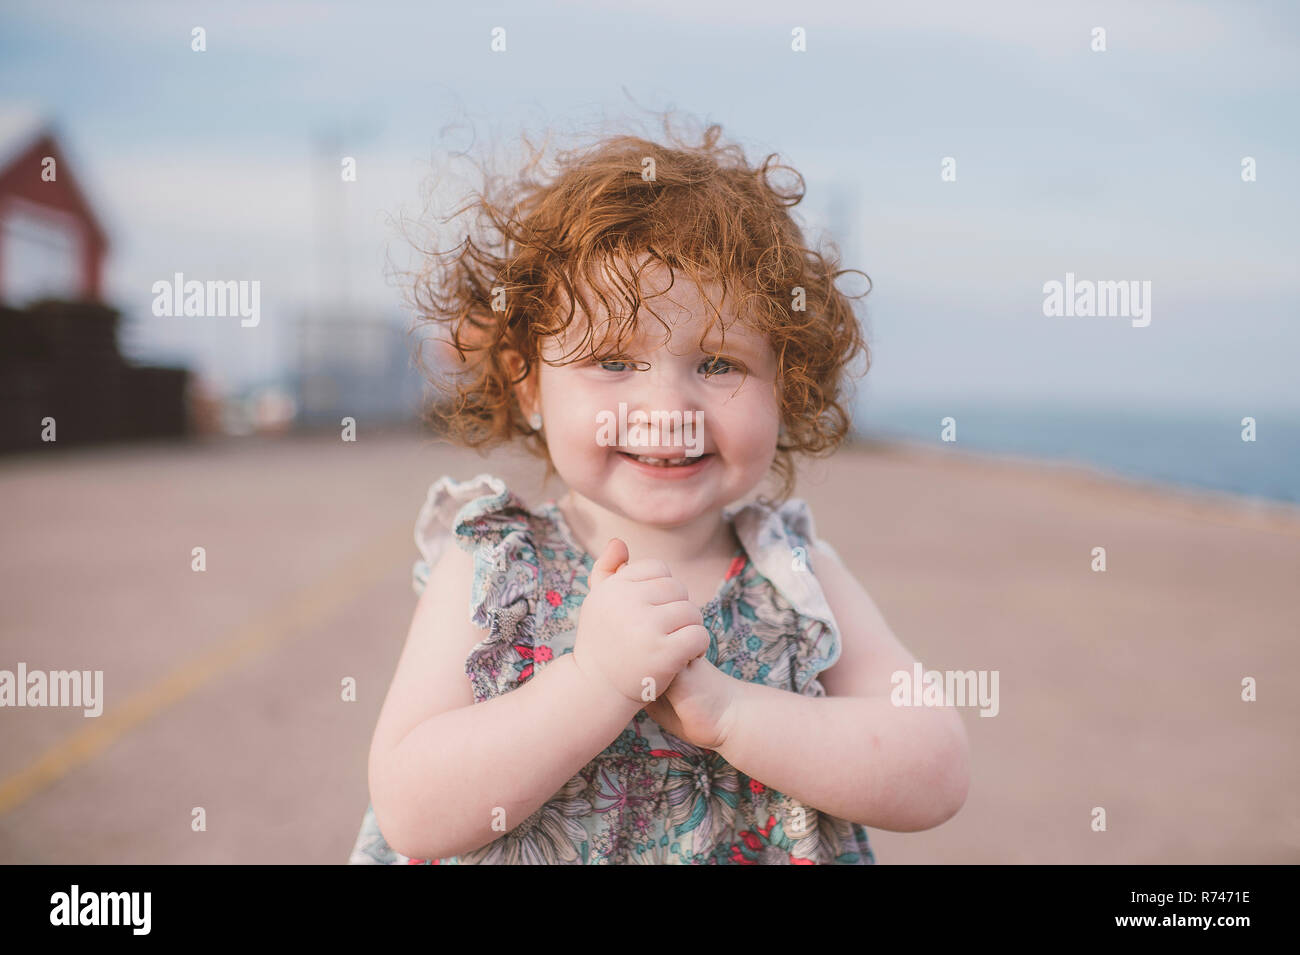 Girl with curly red hair at coast, portrait Stock Photo